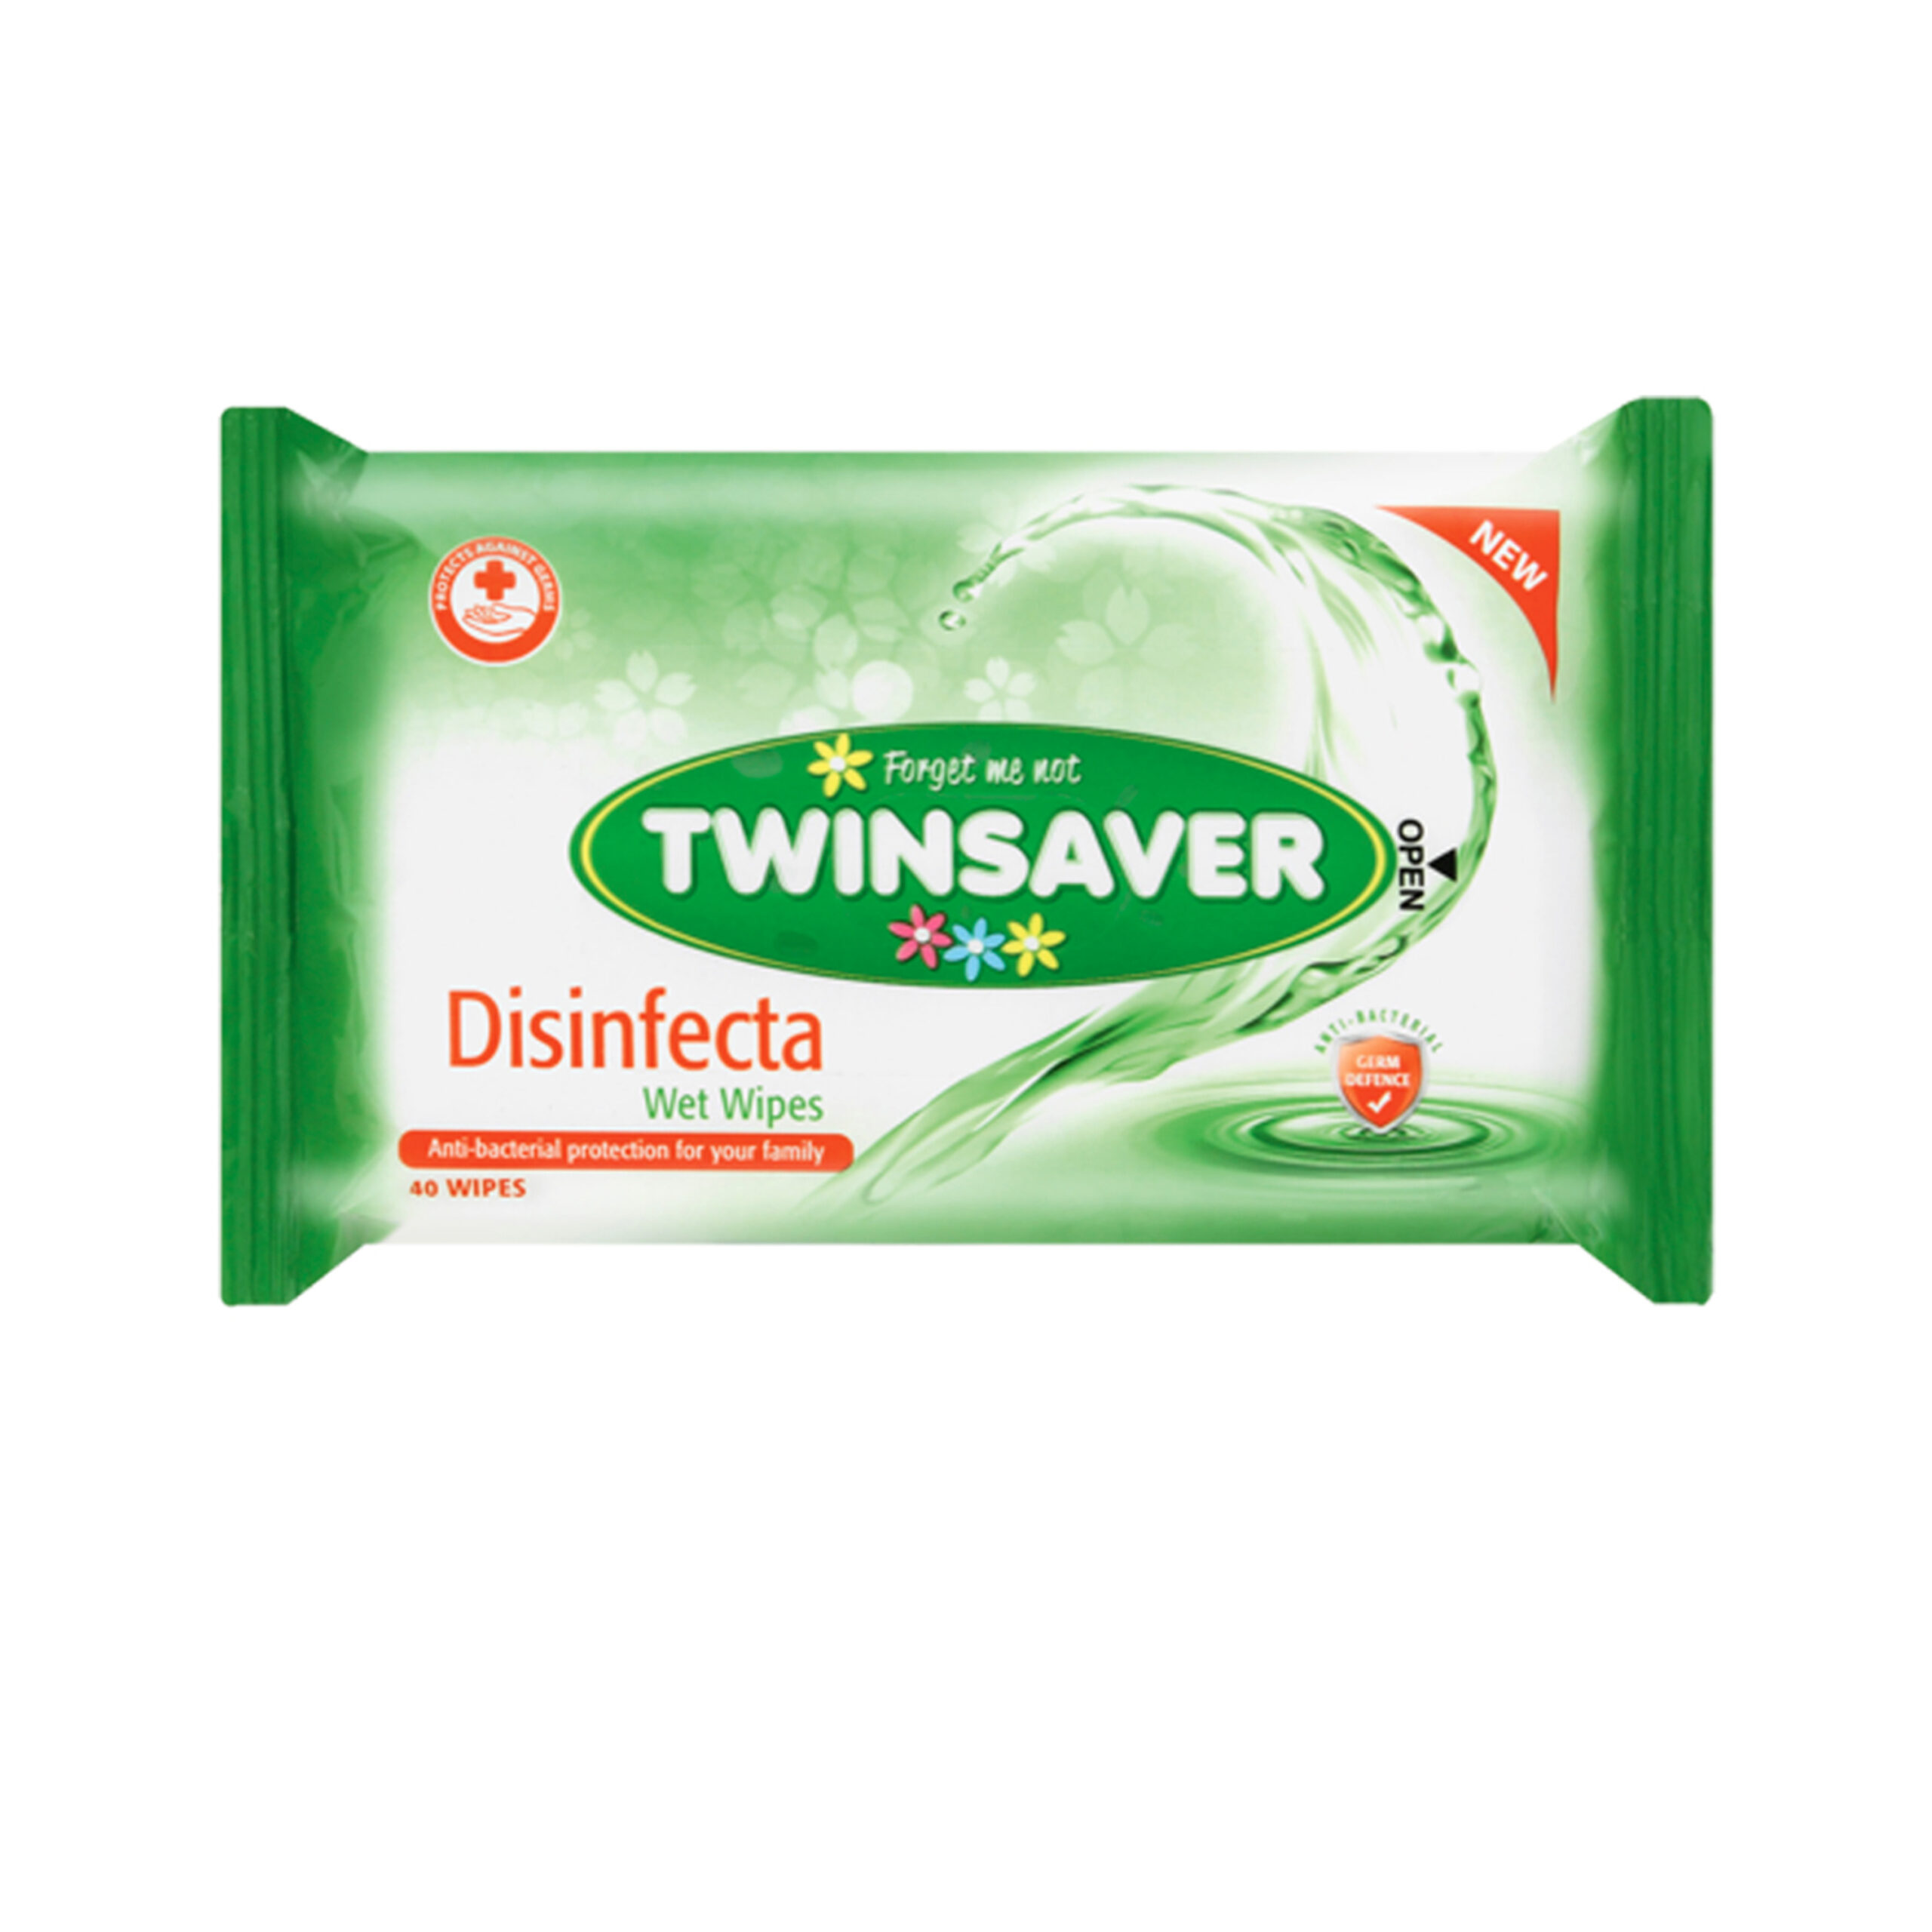 TWINSAVER
DISINFECTA WET
WIPES 40s